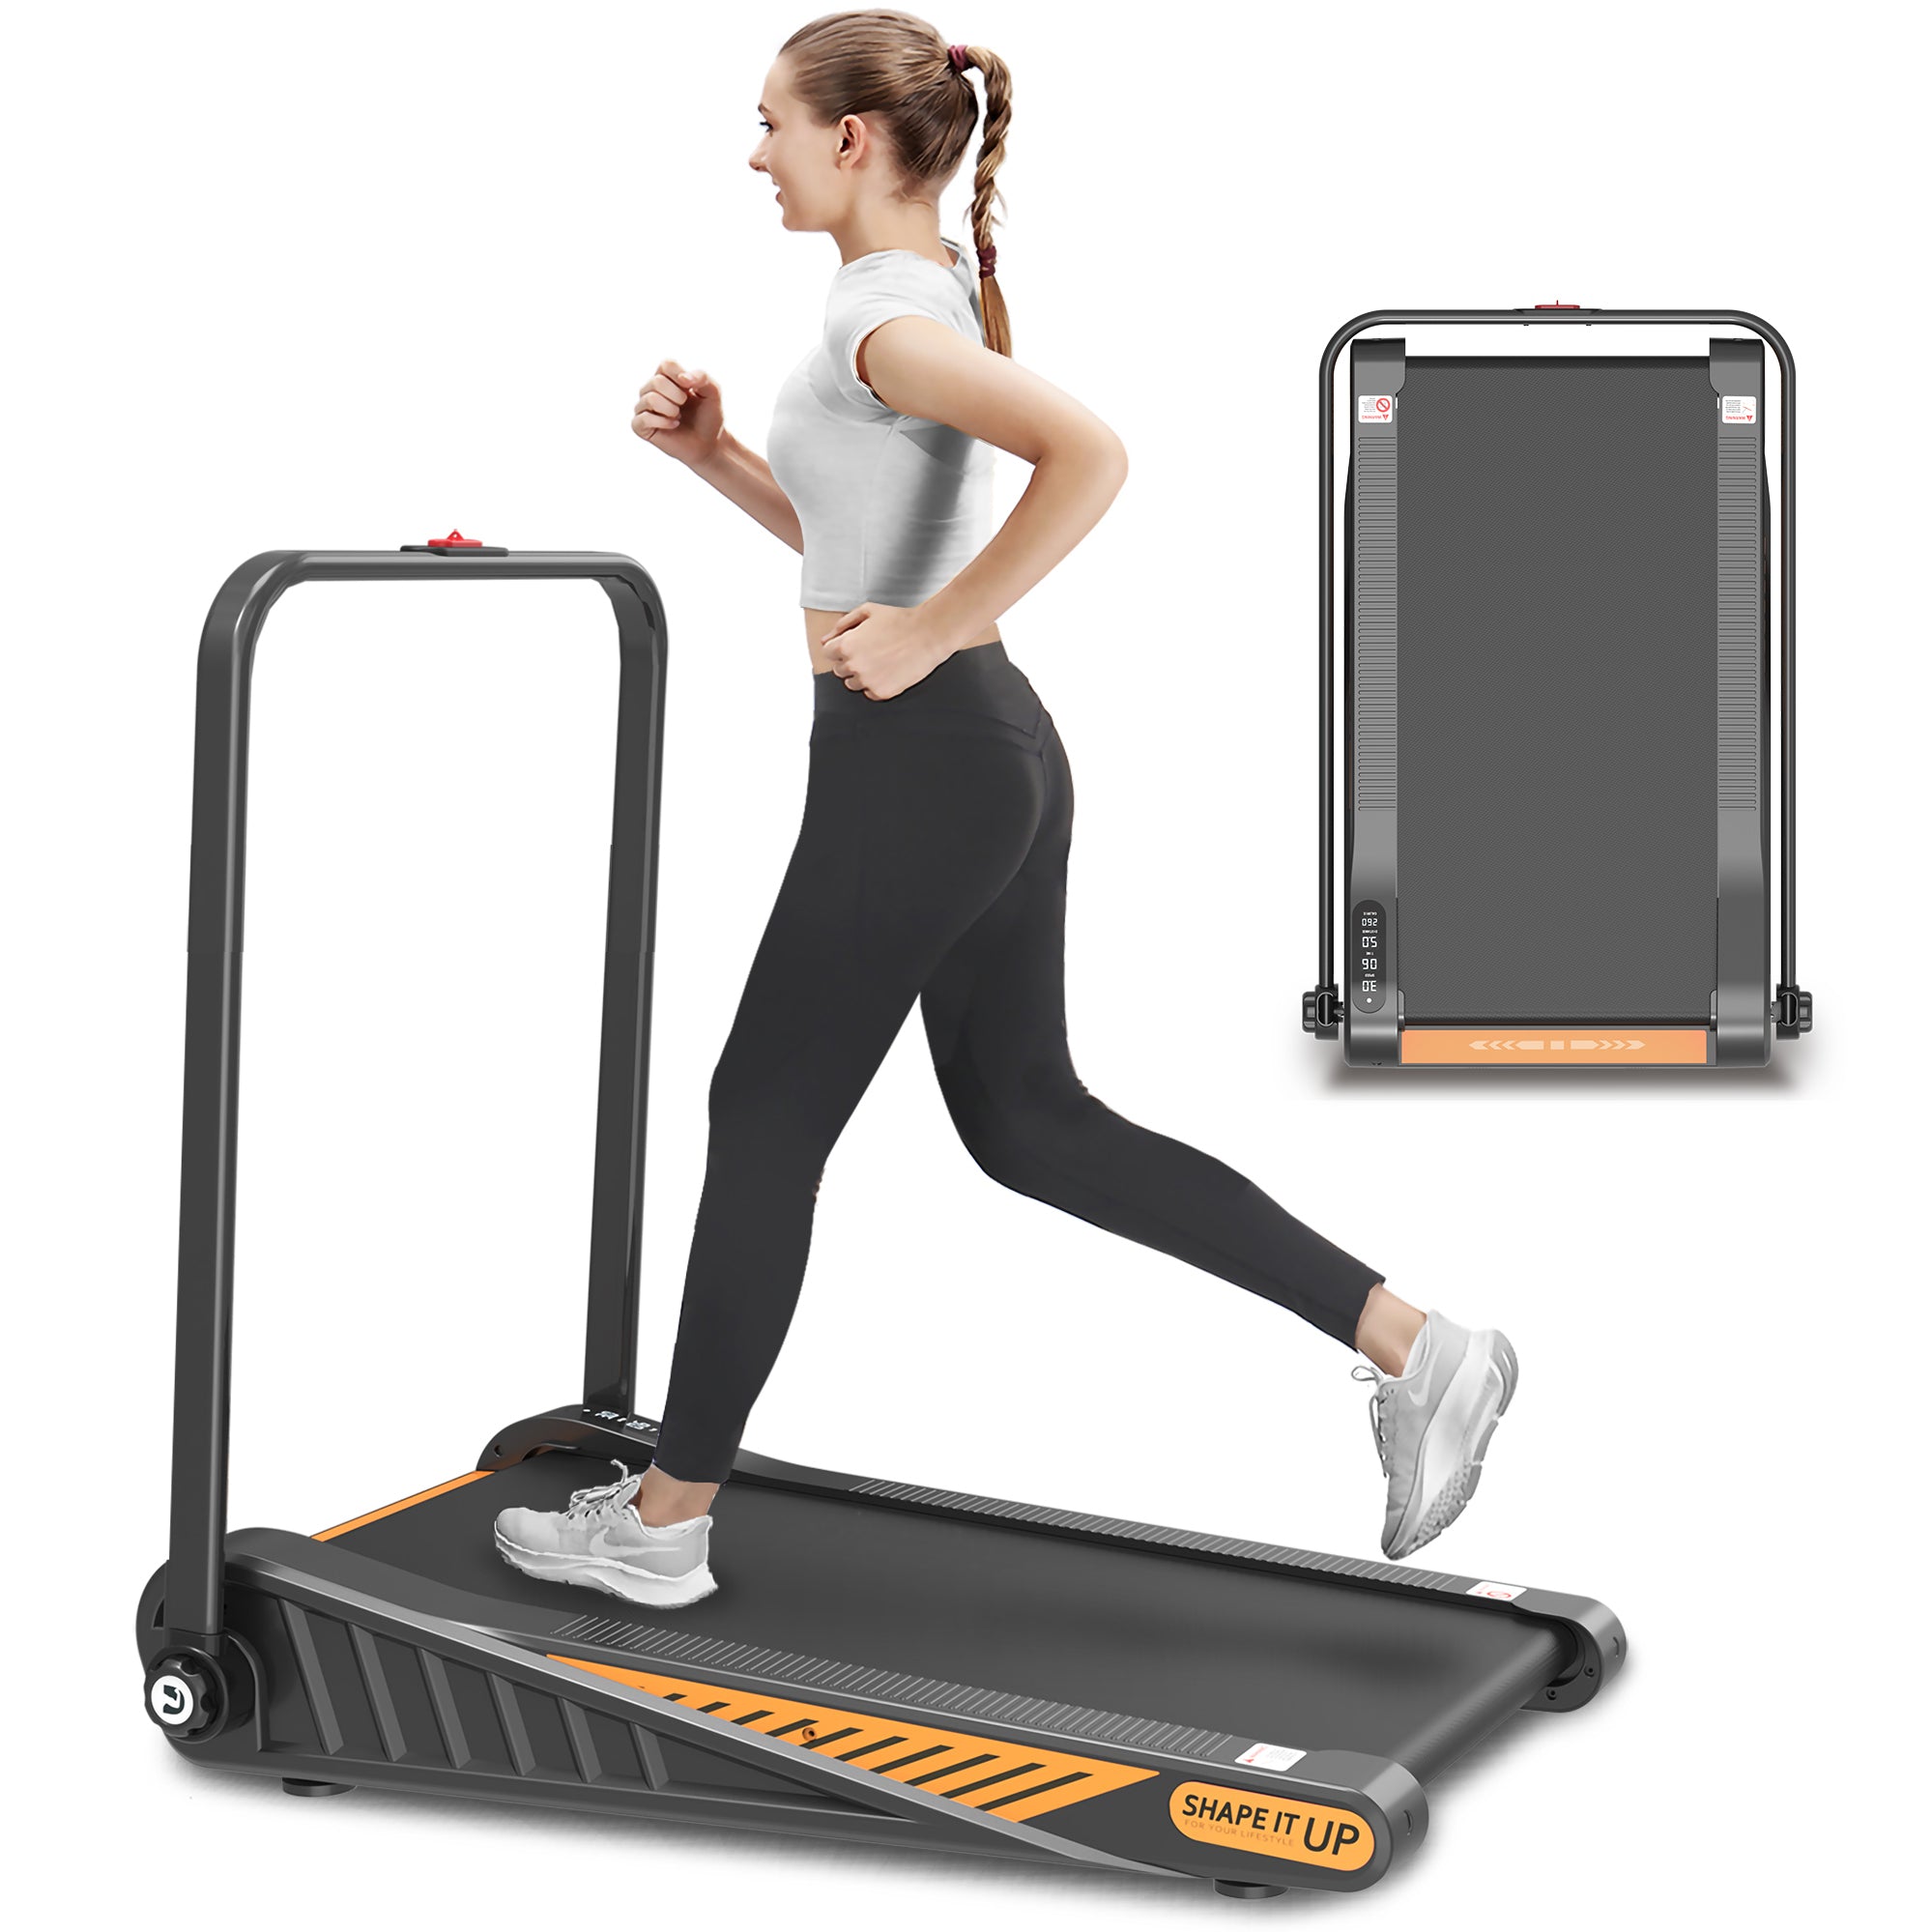 Under Desk Walking Pad, Treadmill 8% Incline 2.5HP 280LBS with Remote Control